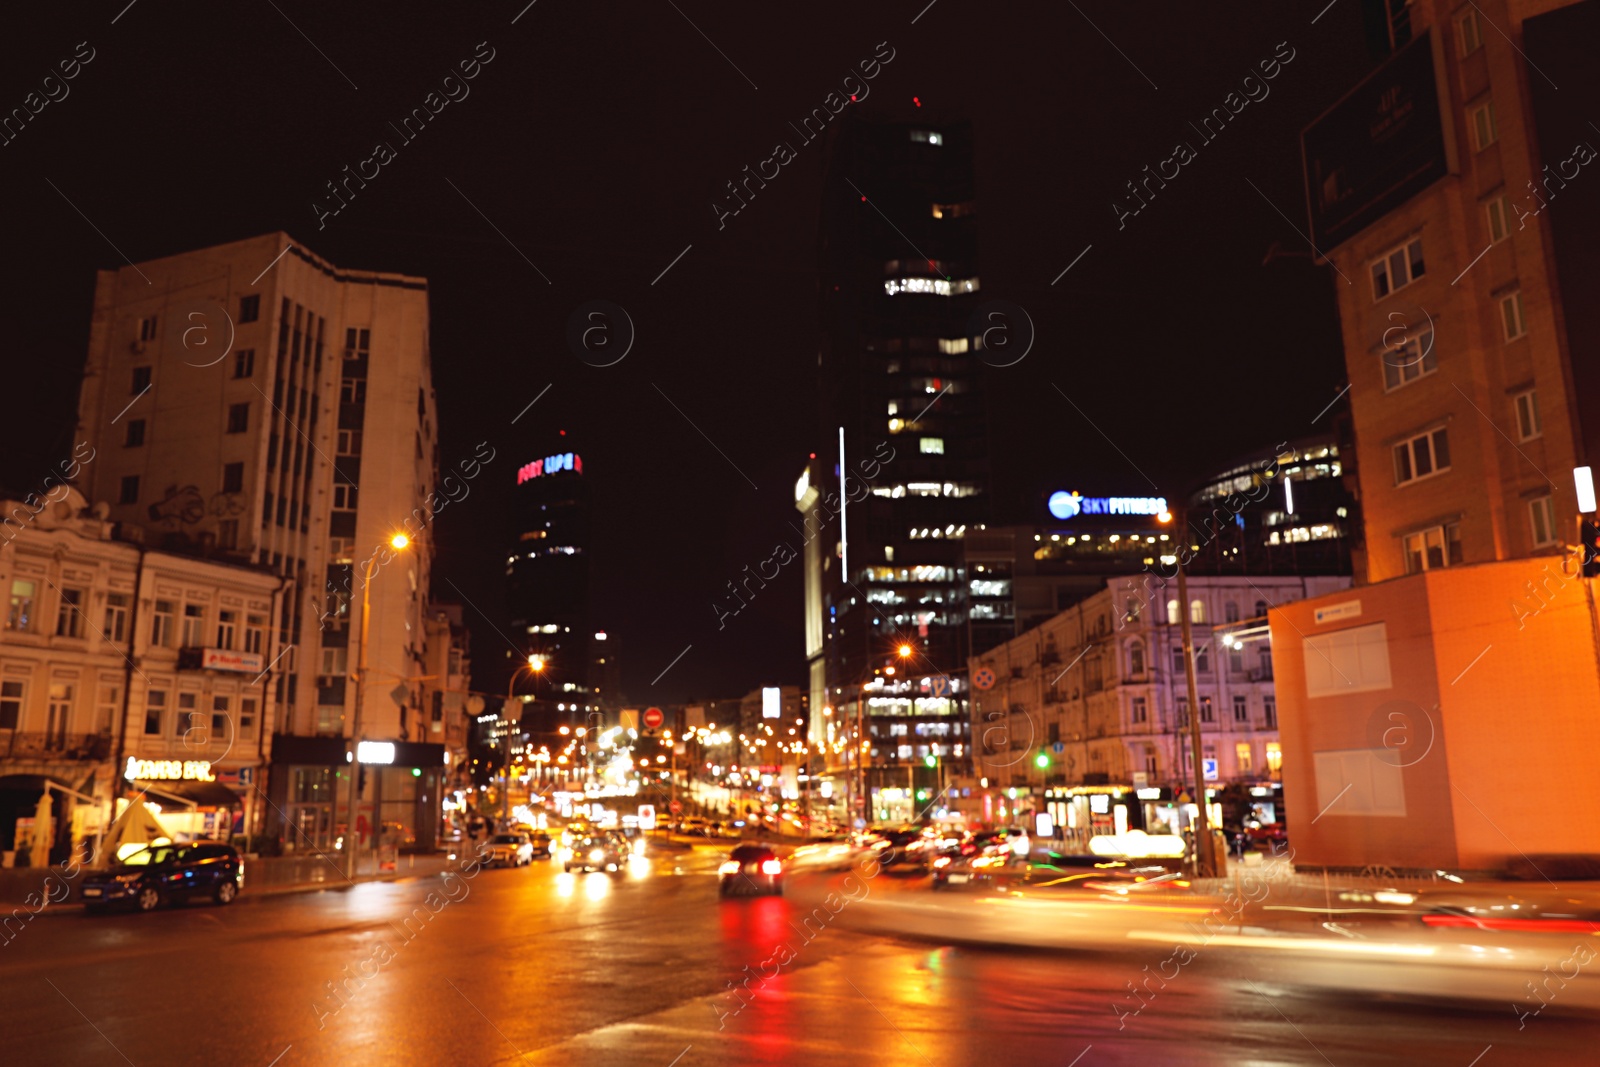 Photo of KYIV, UKRAINE - MAY 22, 2019: View of night city with illuminated buildings and road traffic